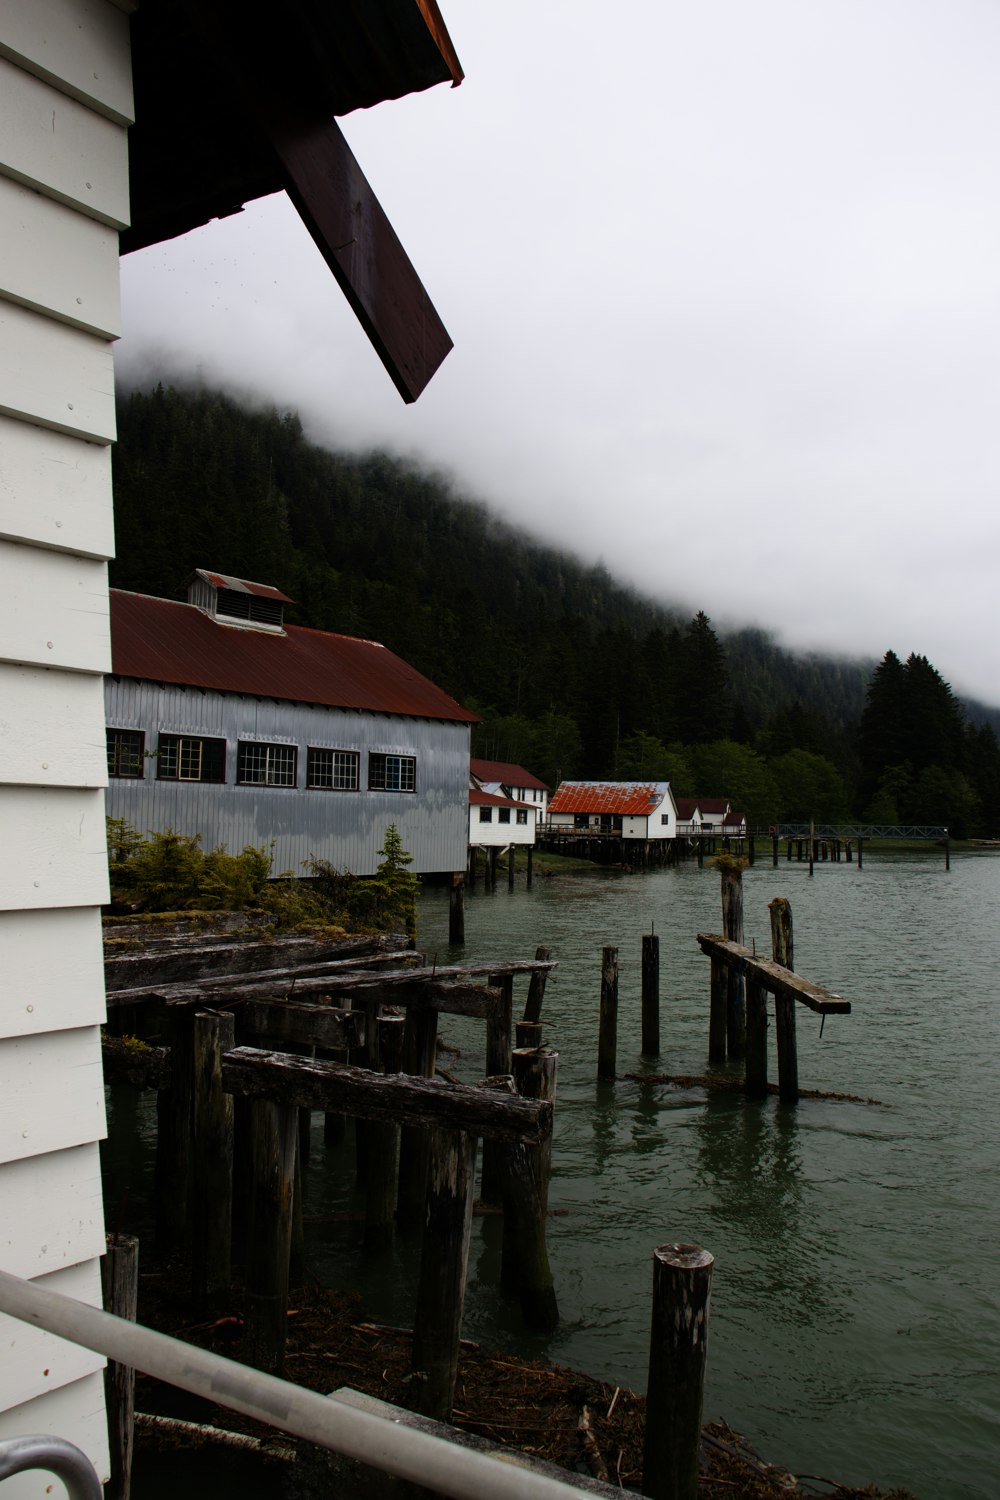 a body of water with buildings along it